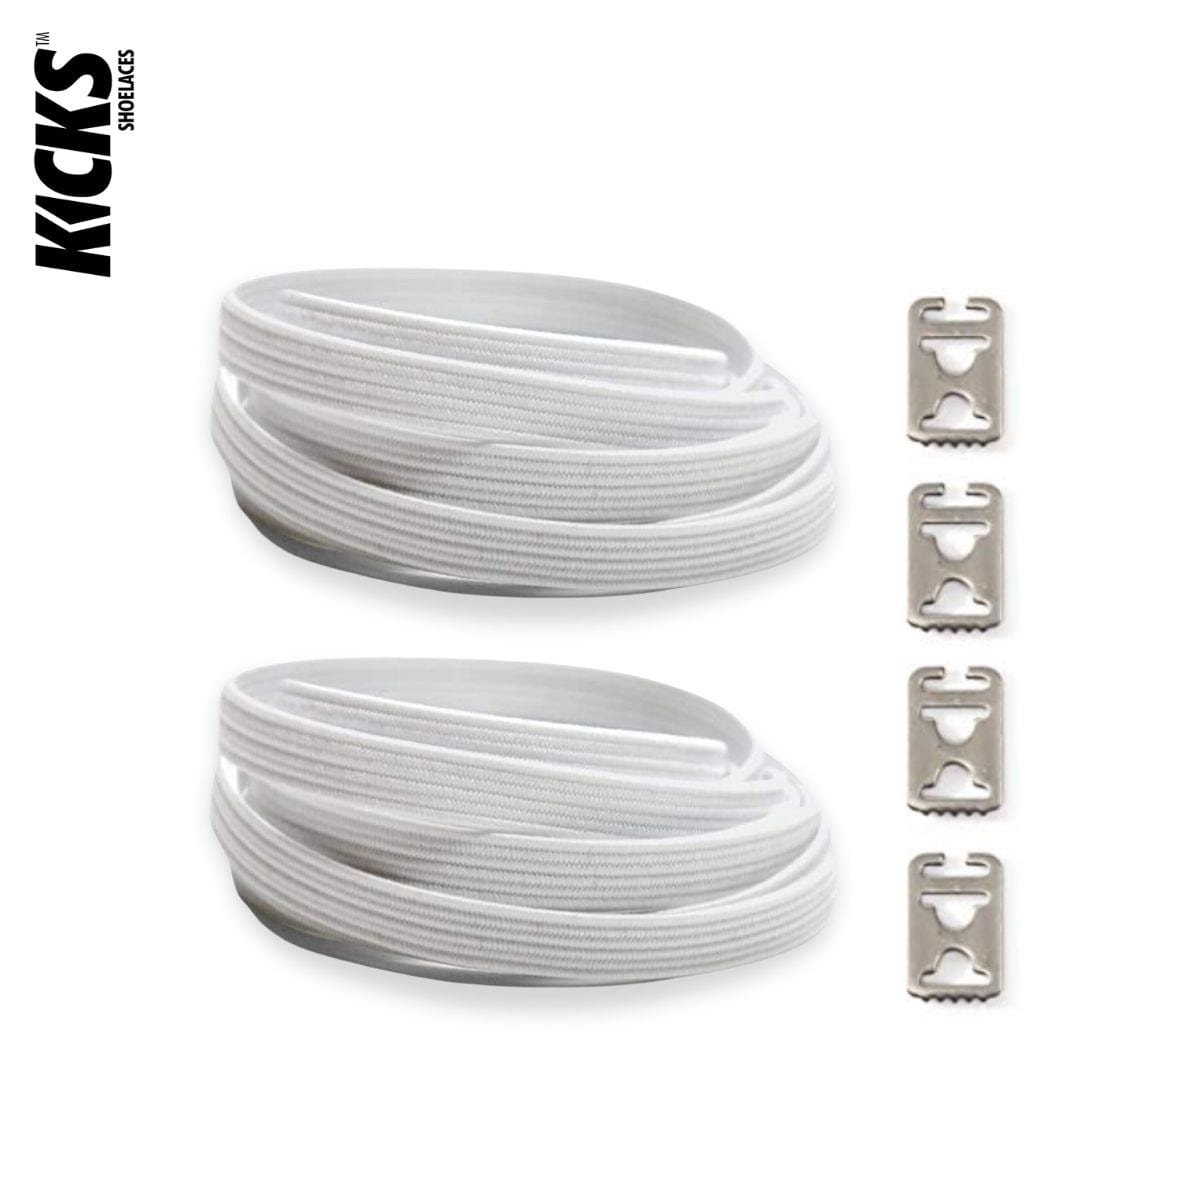 Replacement for Shoe Laces White No-Tie Shoelaces